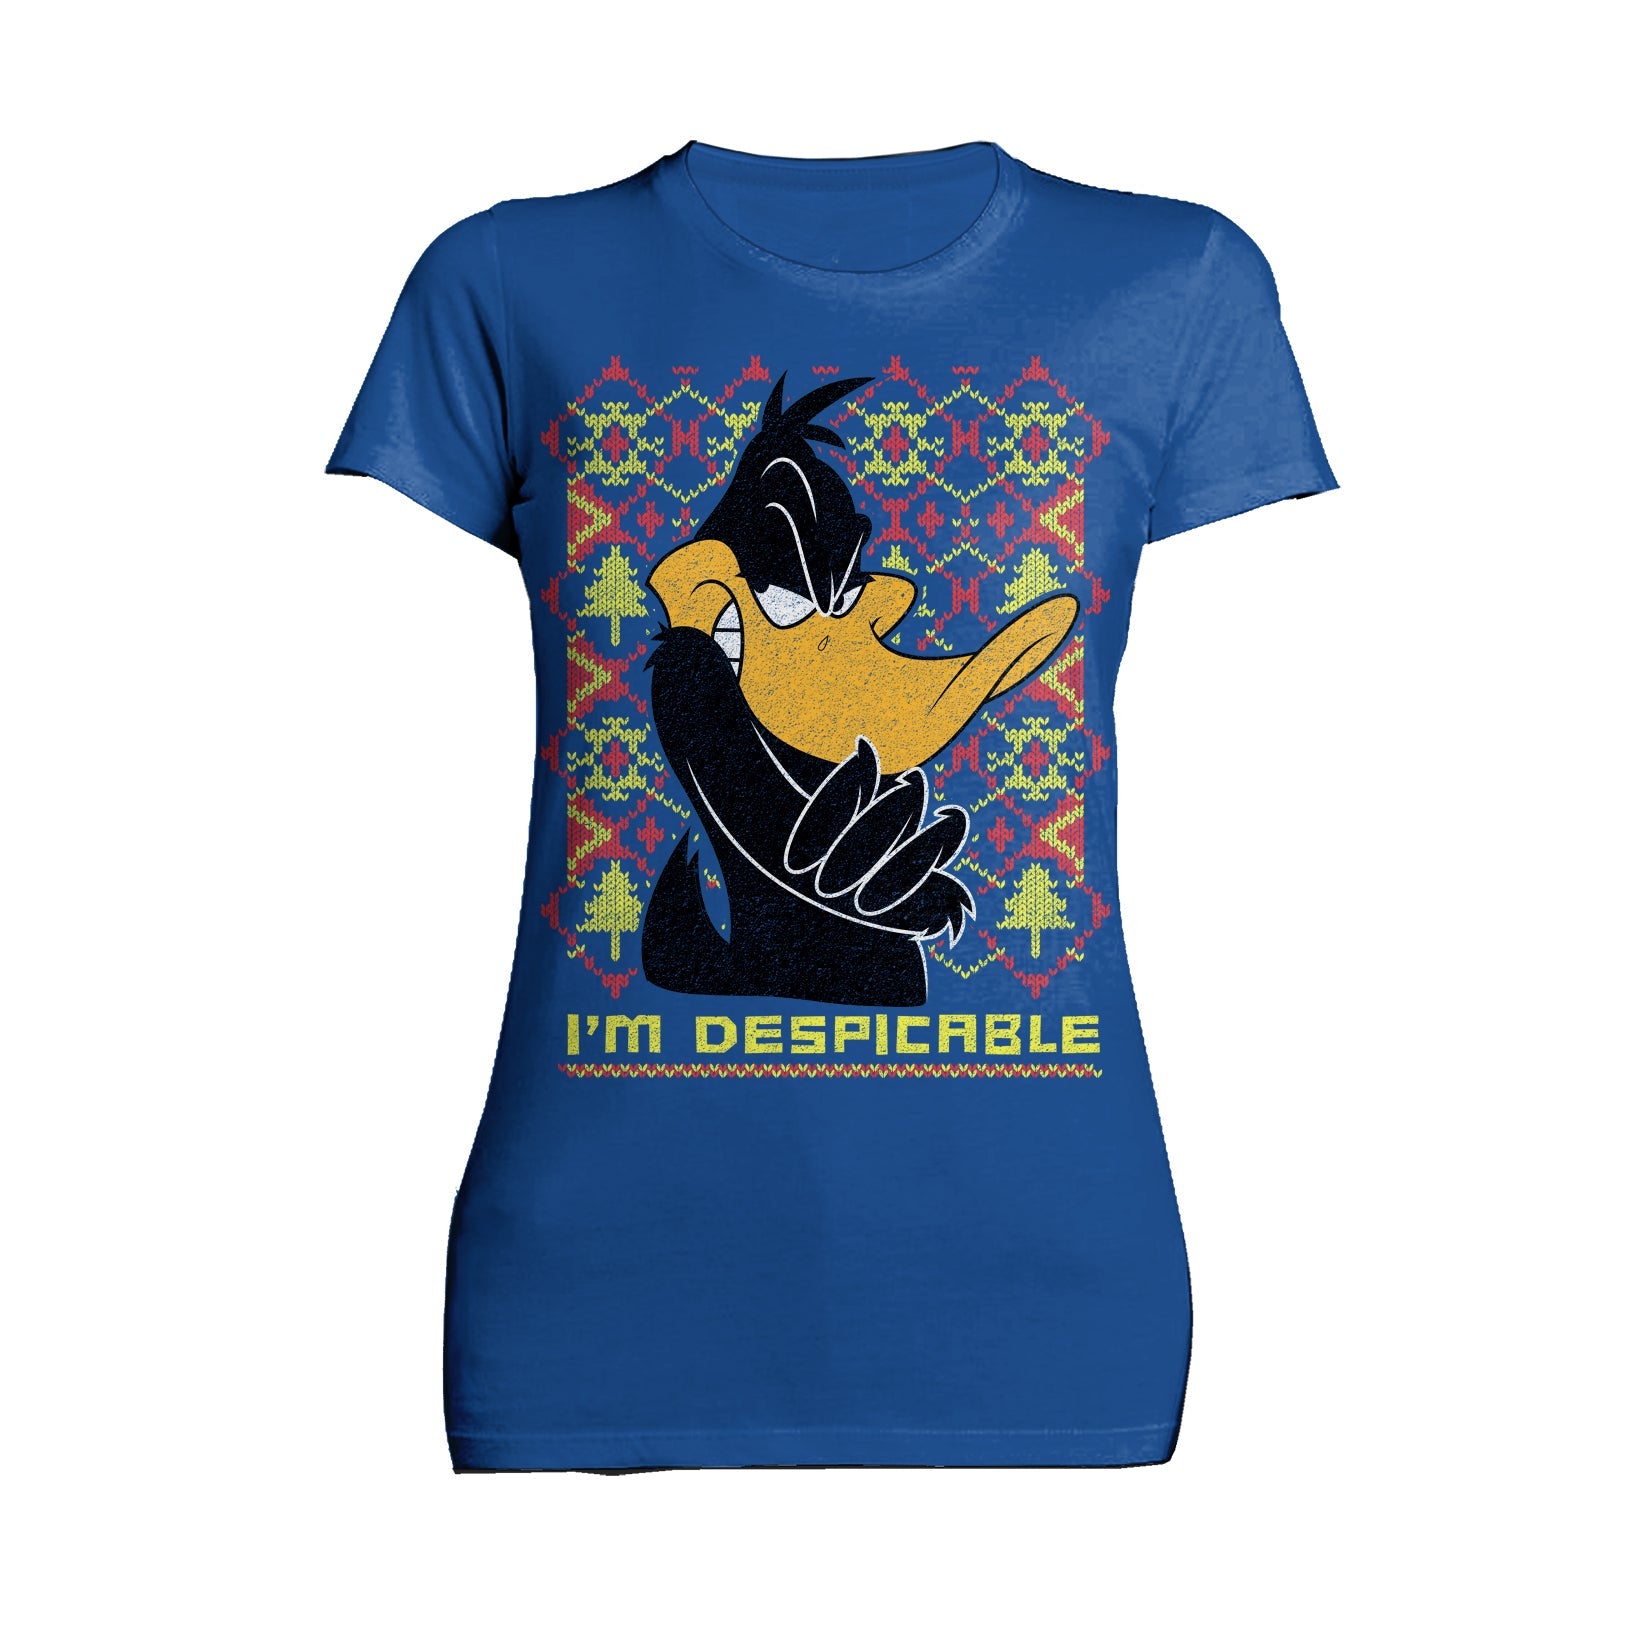 Looney Tunes Daffy Duck Xmas Despicable Official Women's T-Shirt